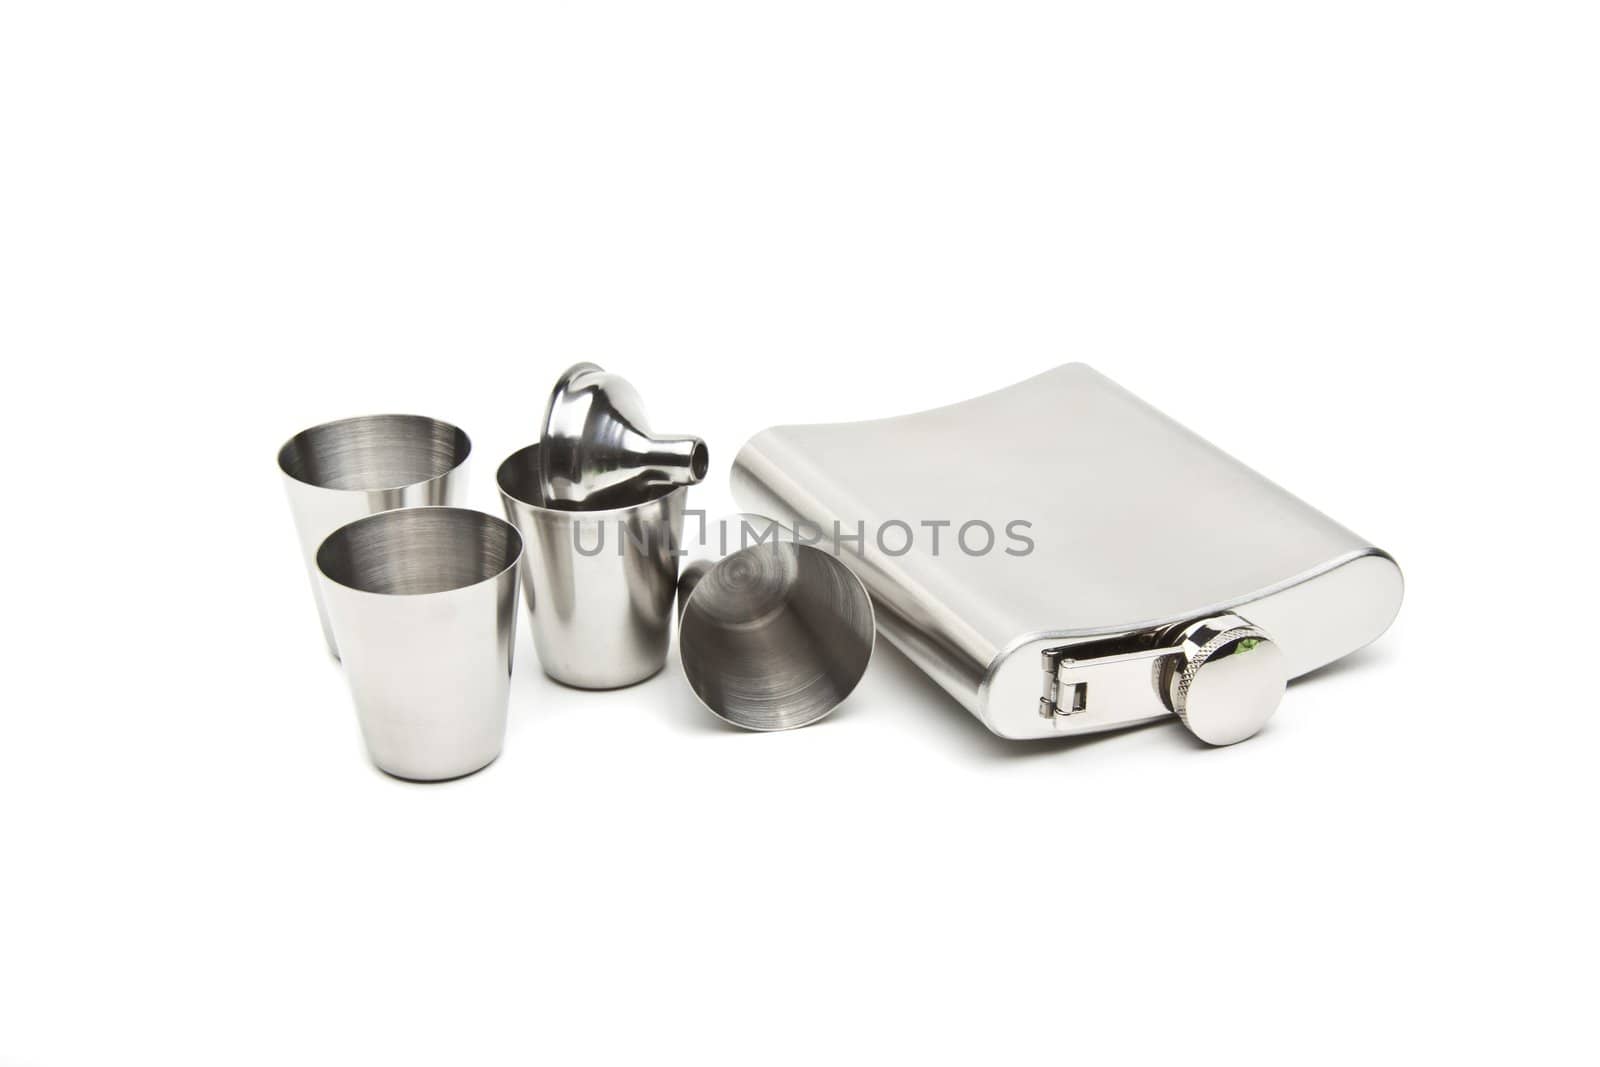 Hip flask and cups with white background by ozaiachin